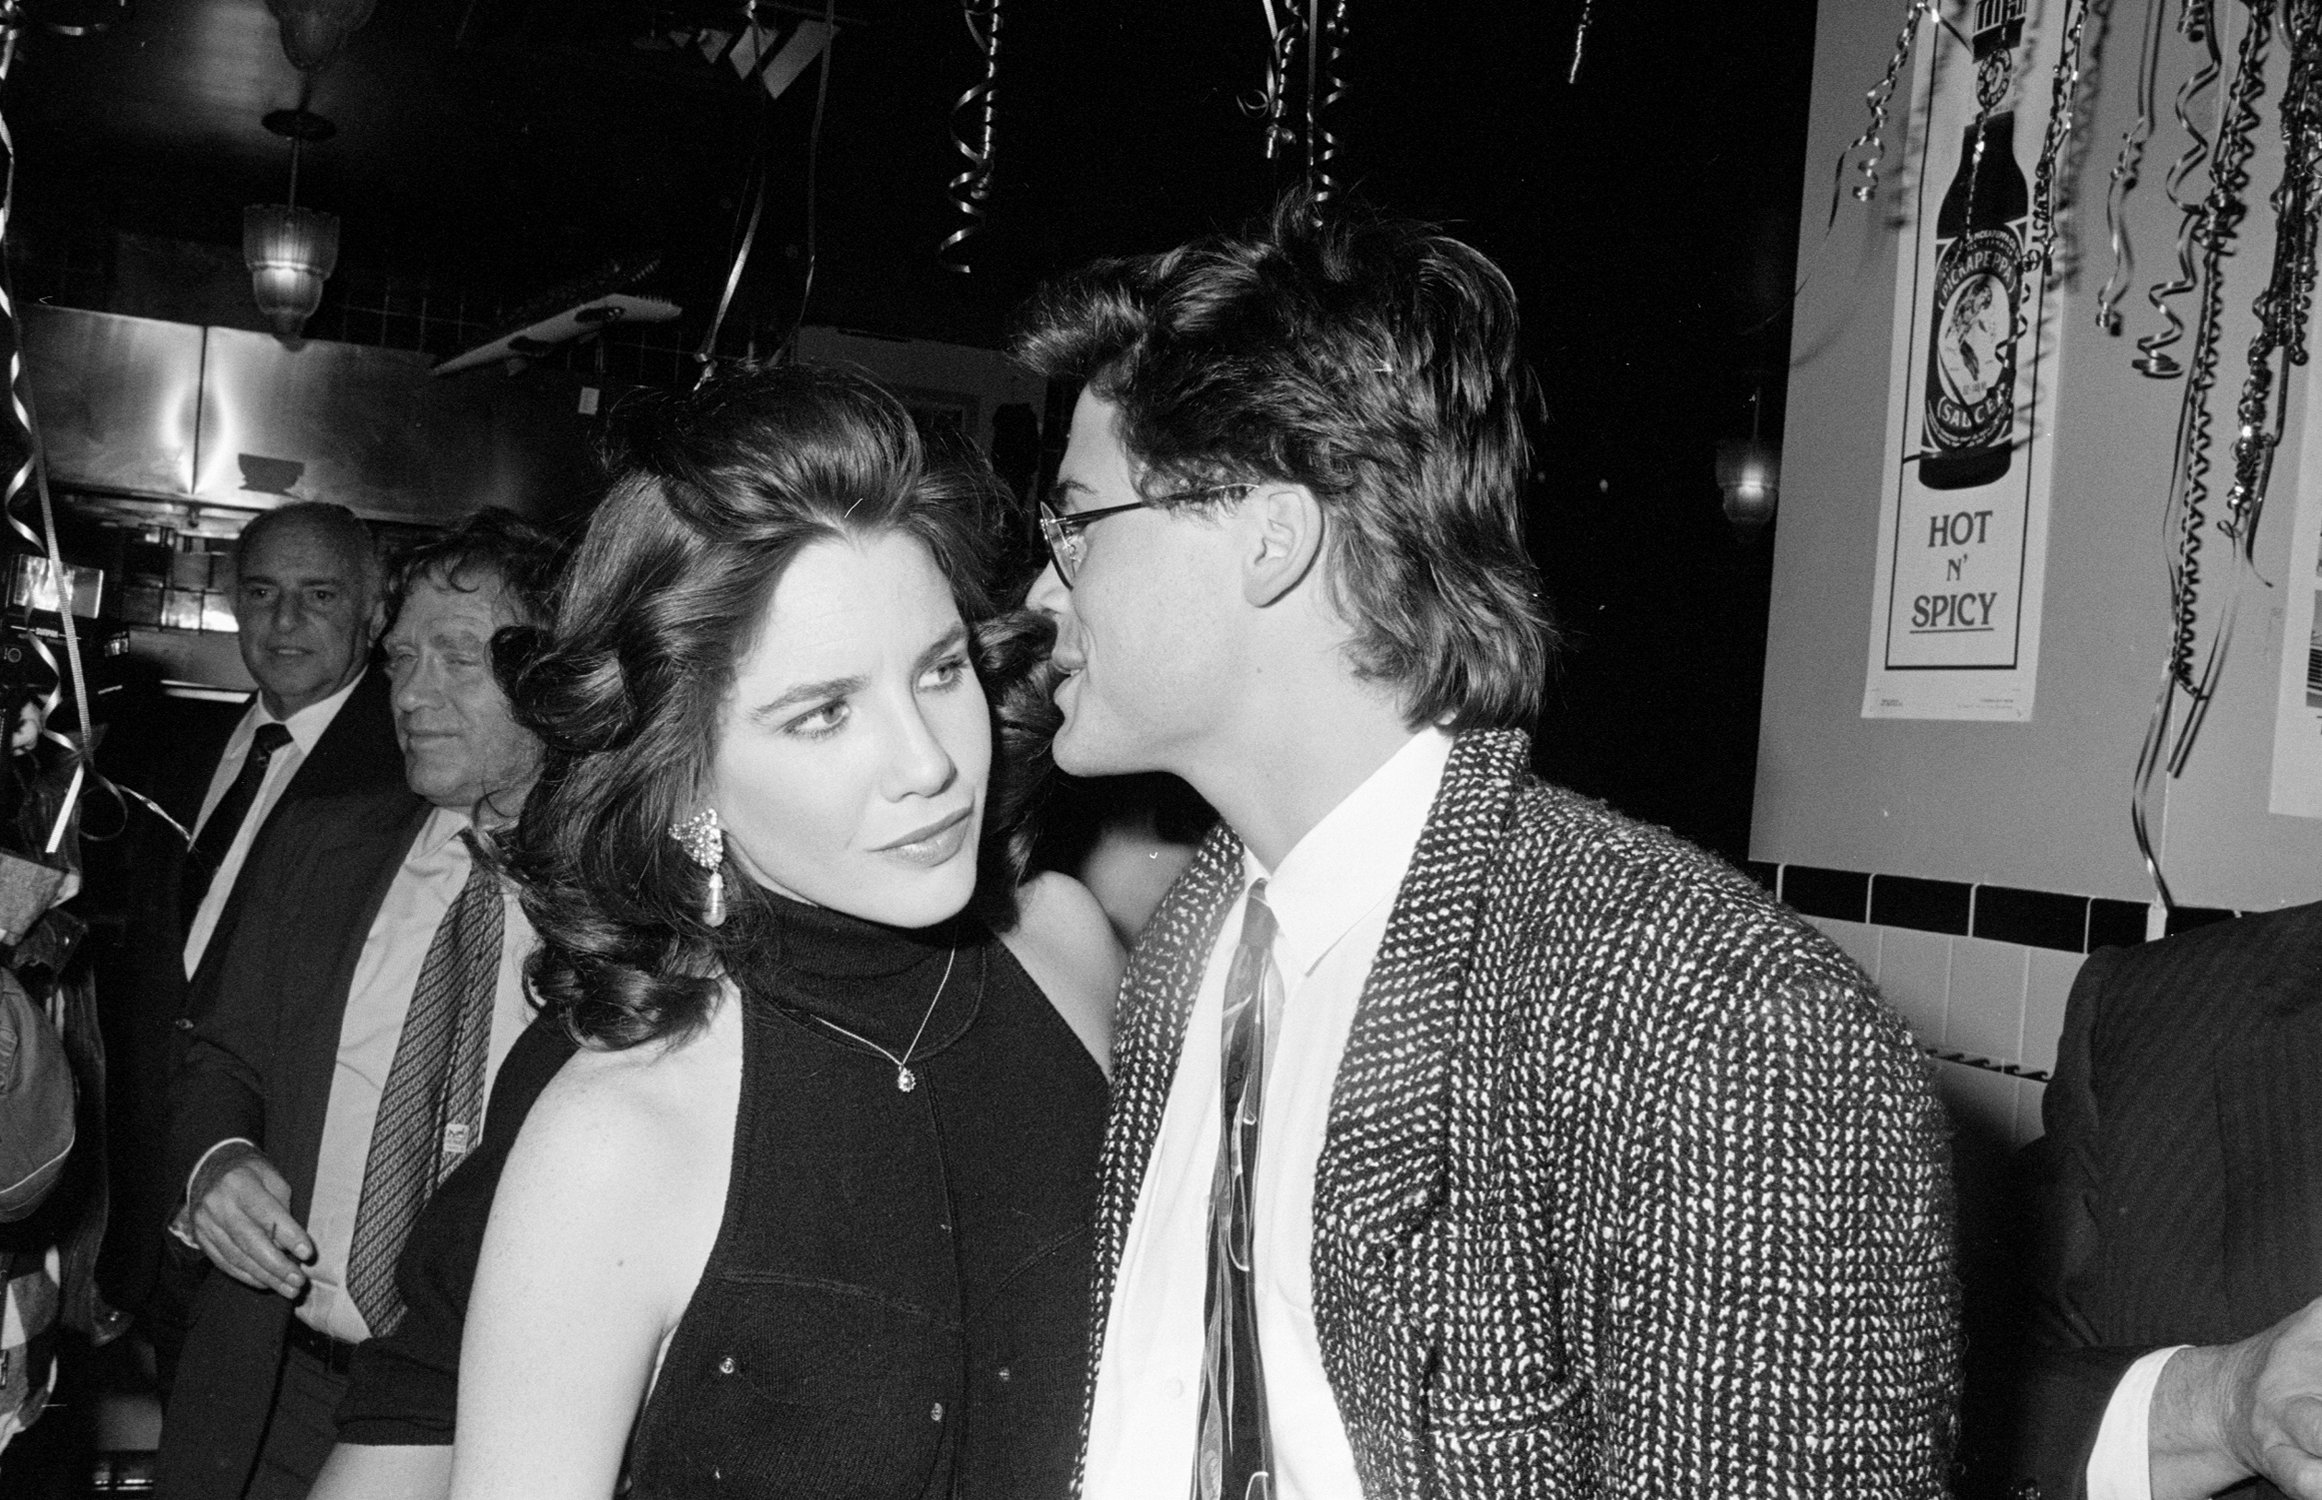 What was Rob Lowe whispering into Melissa Gilbert's ear? |  The LIFE Picture Collection via Getty Images